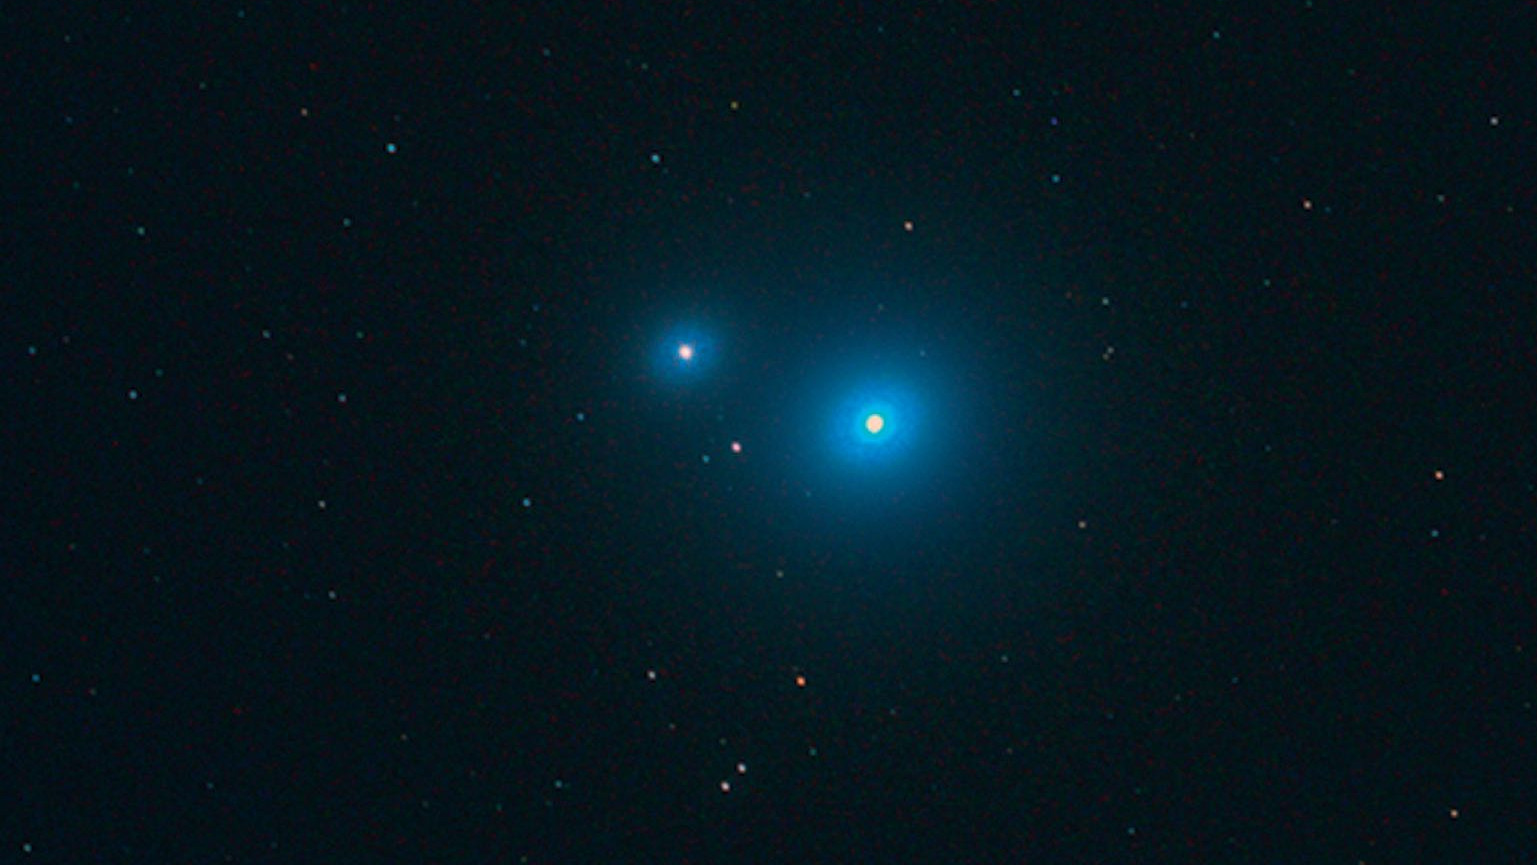 Those who can also see star Alkor (left), have good eyesight. Mizar is itself a system comprising two binary stars. Rolf Löhr